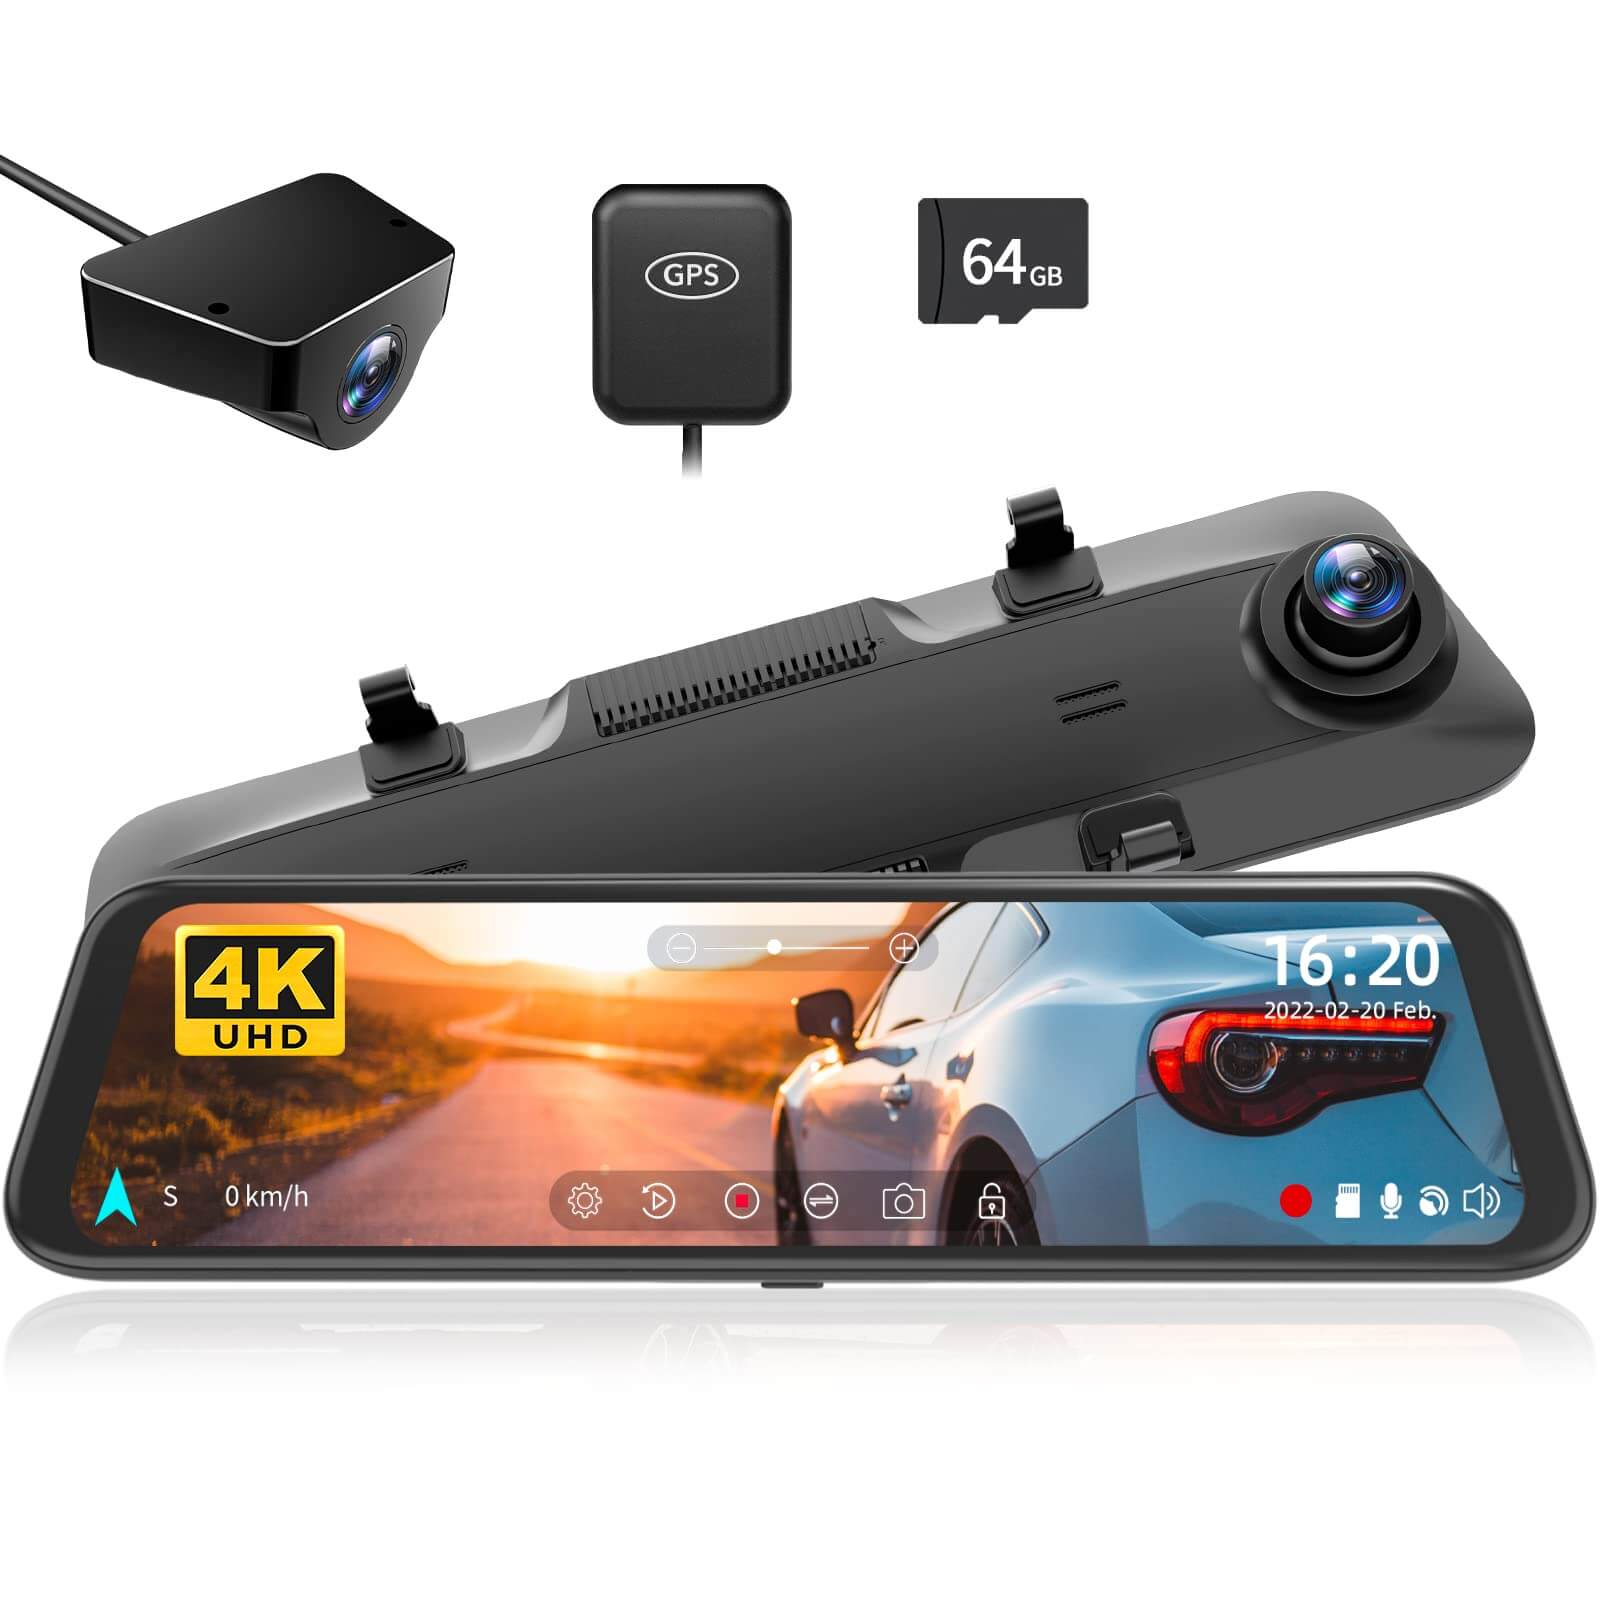 WOLFBOX G850 Rearview Mirror Backup Camera Dash Cam